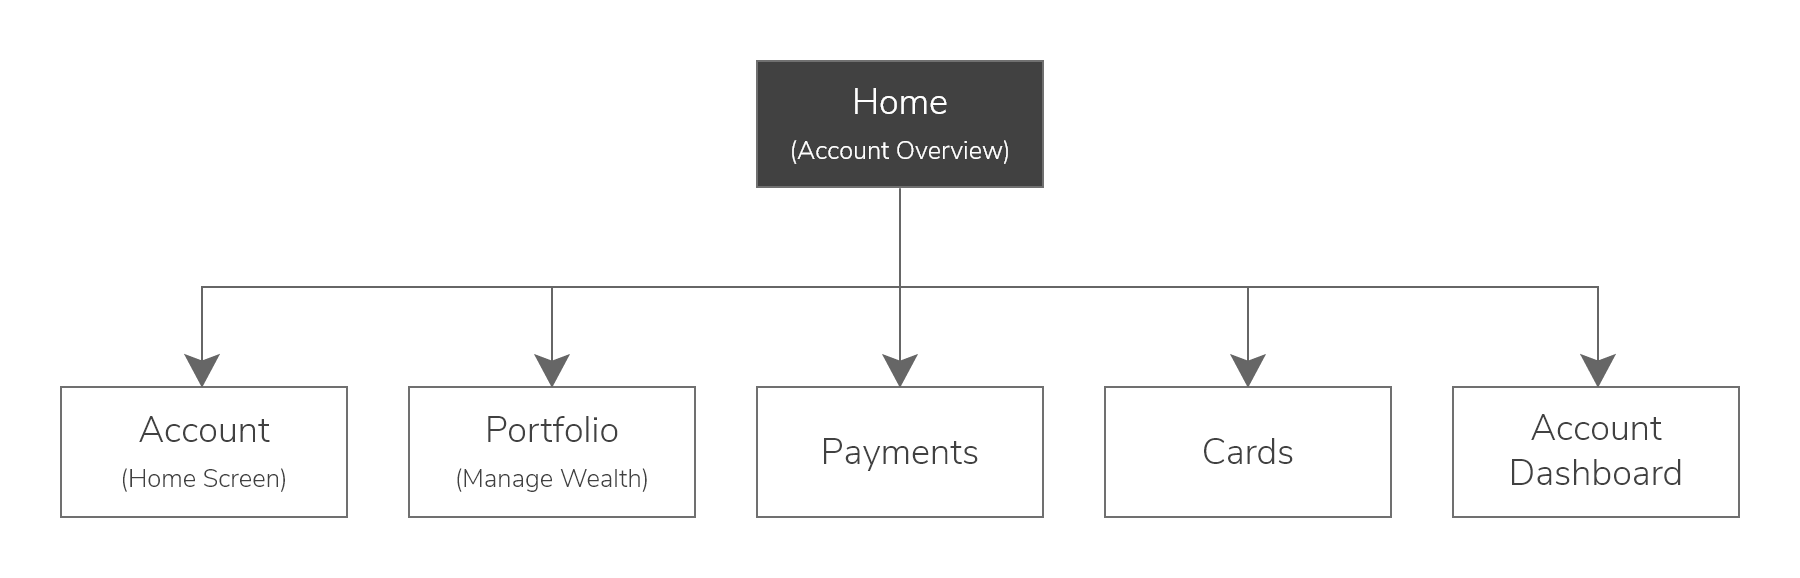 A diagram showing the main navigational menus to be used, which are: Account, Portfolio, Payments, Cards, and Dashboard